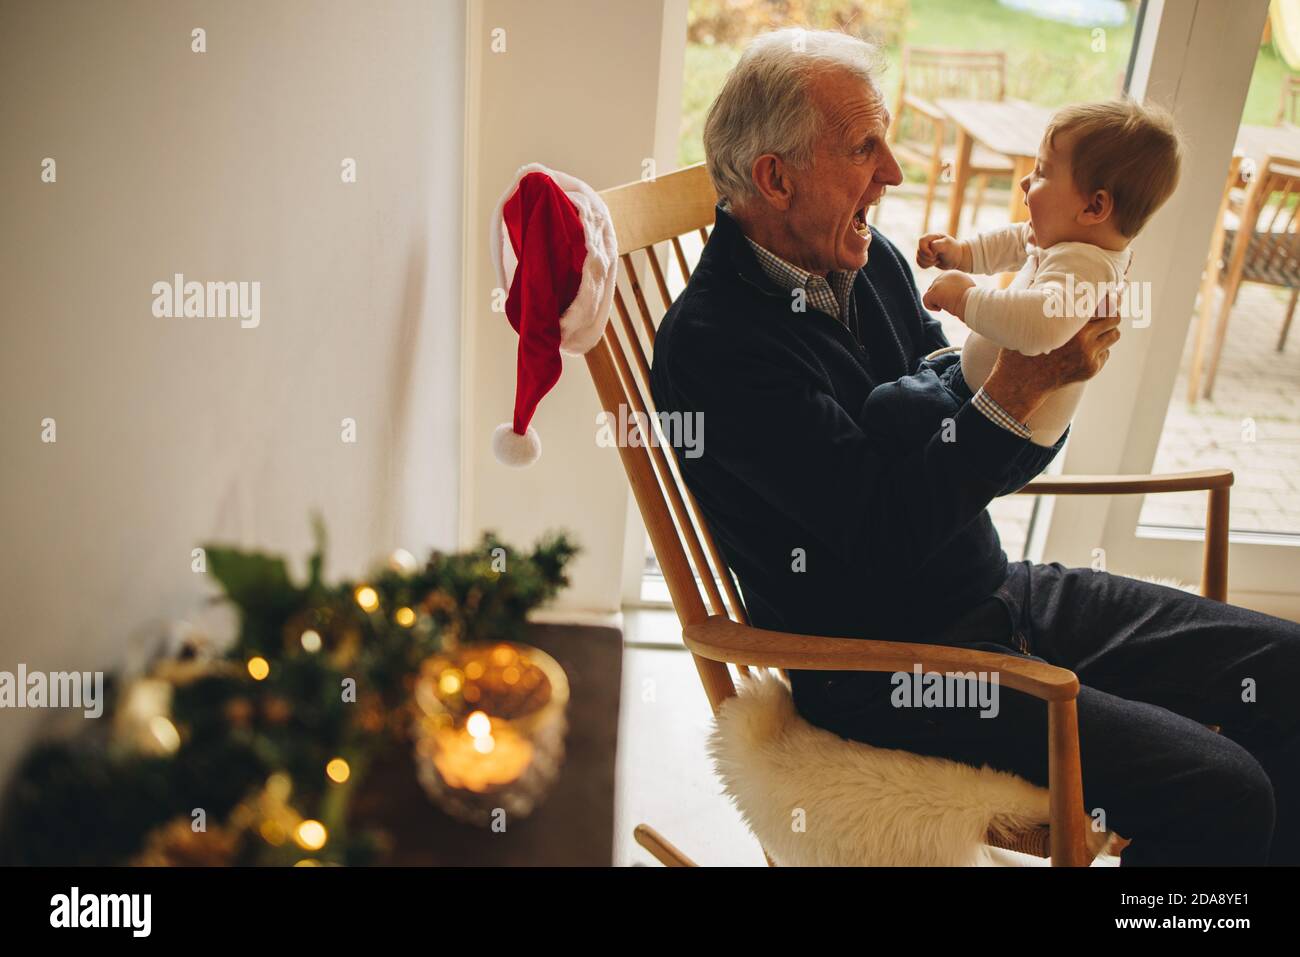 Senior man having fun with small boy at home during christmas. Grandfather sitting on chair playing with his grandson. Stock Photo